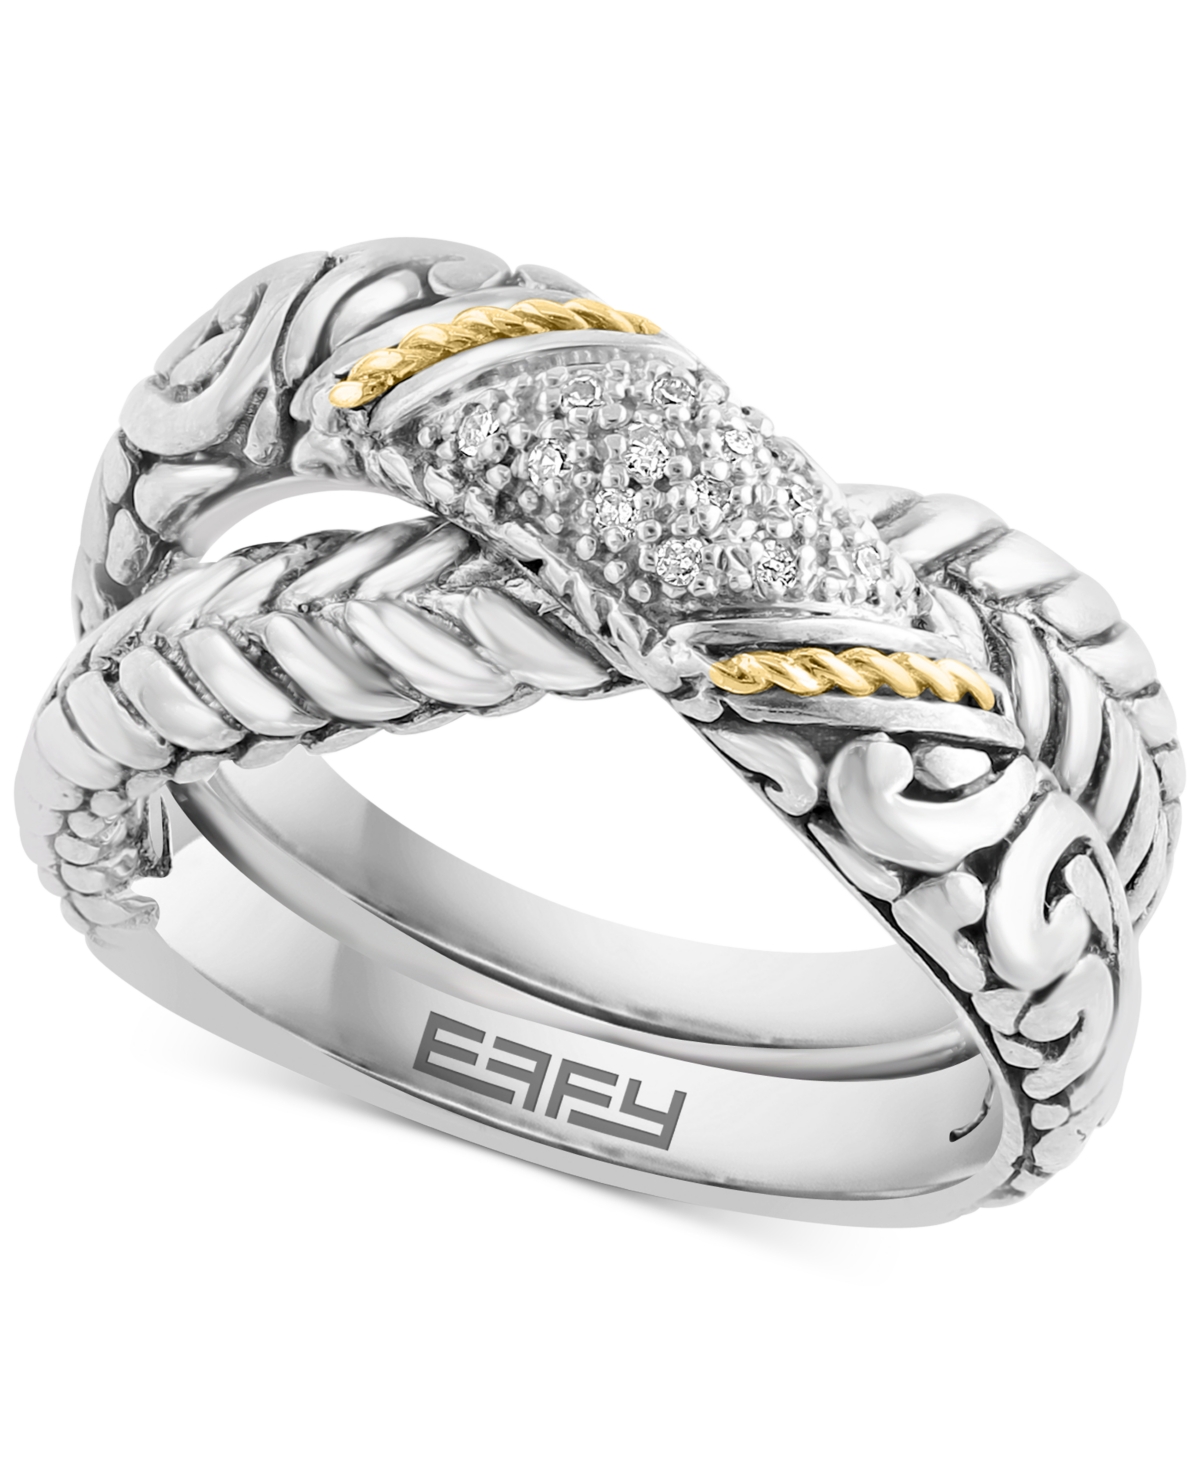 Effy Collection Effy Diamond (1/20 ct. t.w.) Crossover Ring in Sterling Silver & 18k Gold-Plate